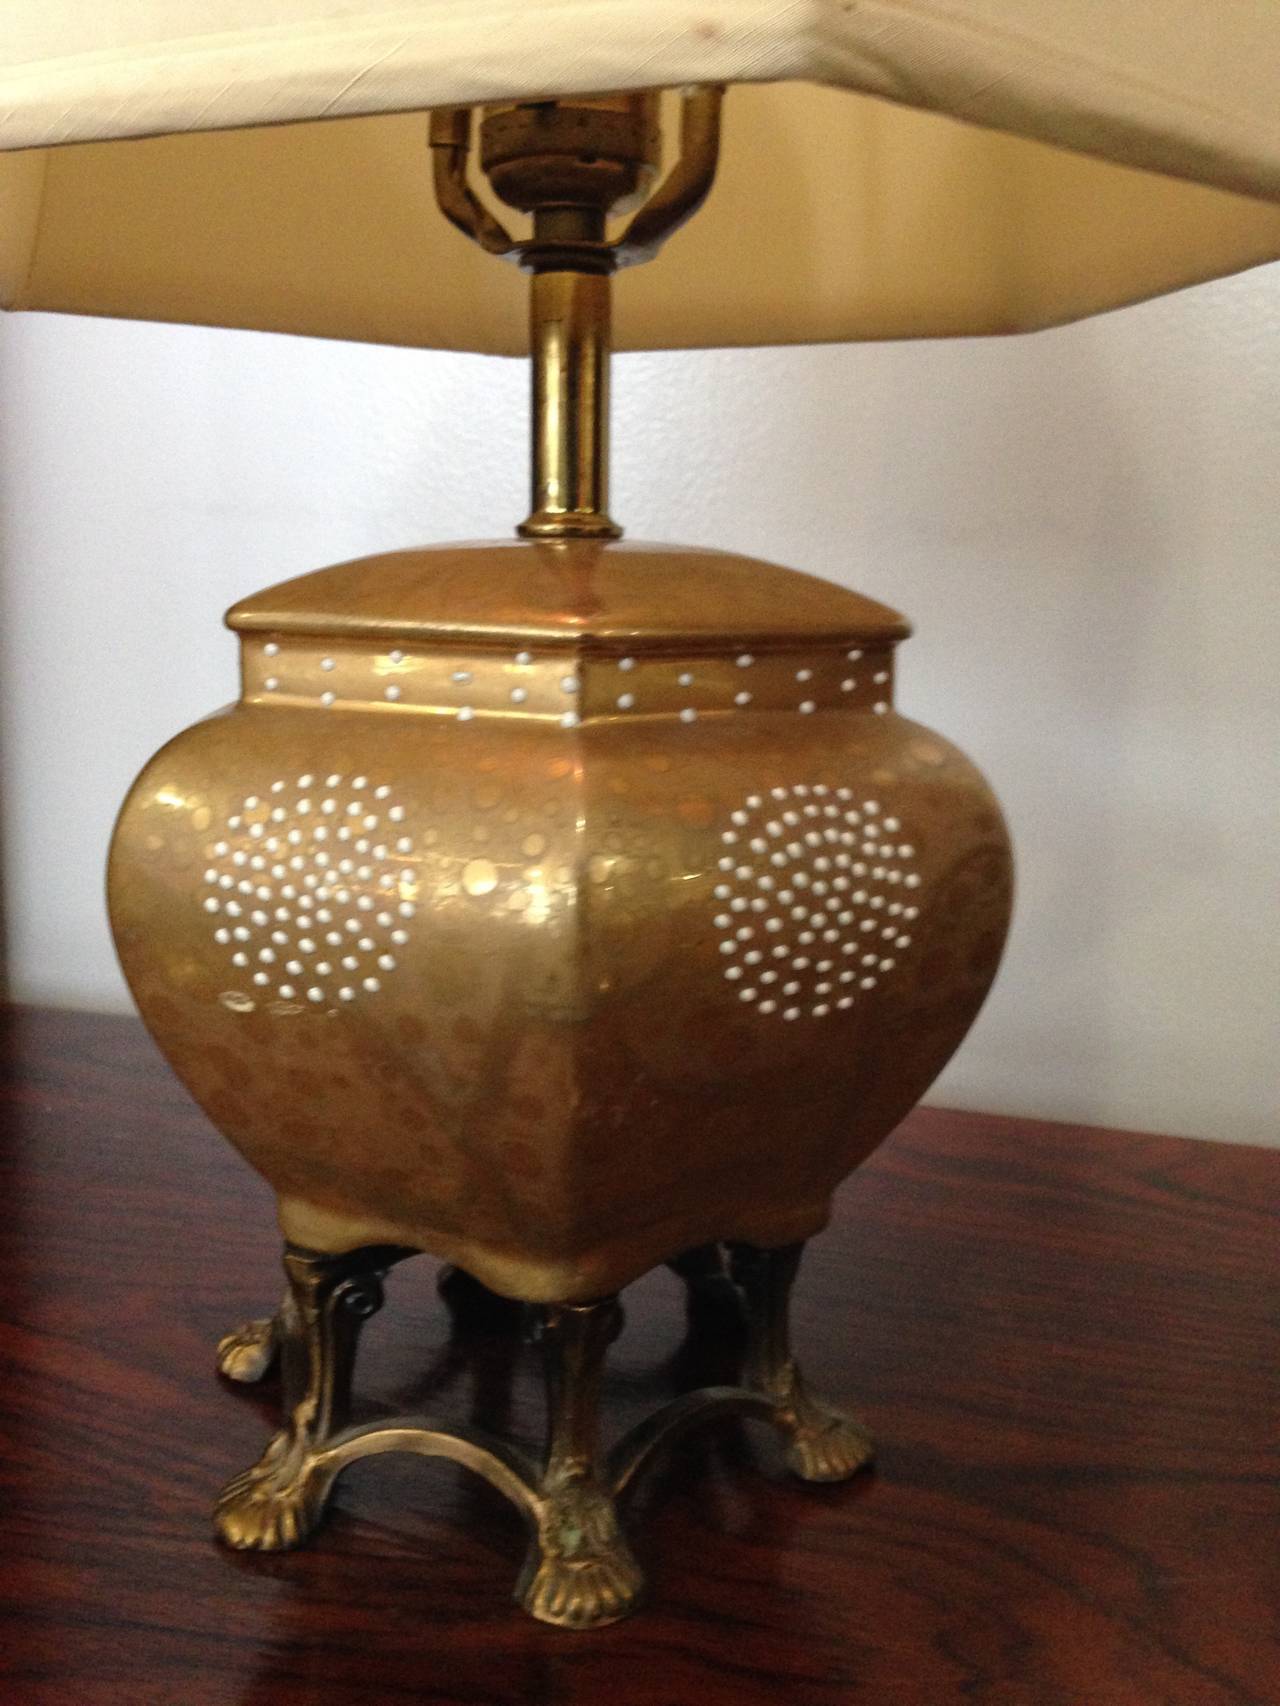 This is a beautiful and sweet little lamp. The ginger jar body is ceramic with a metallic sheen glaze and small white glaze dots atop. The base is brass metal feet. The shade is original and delightfully sized. Wonderful color.